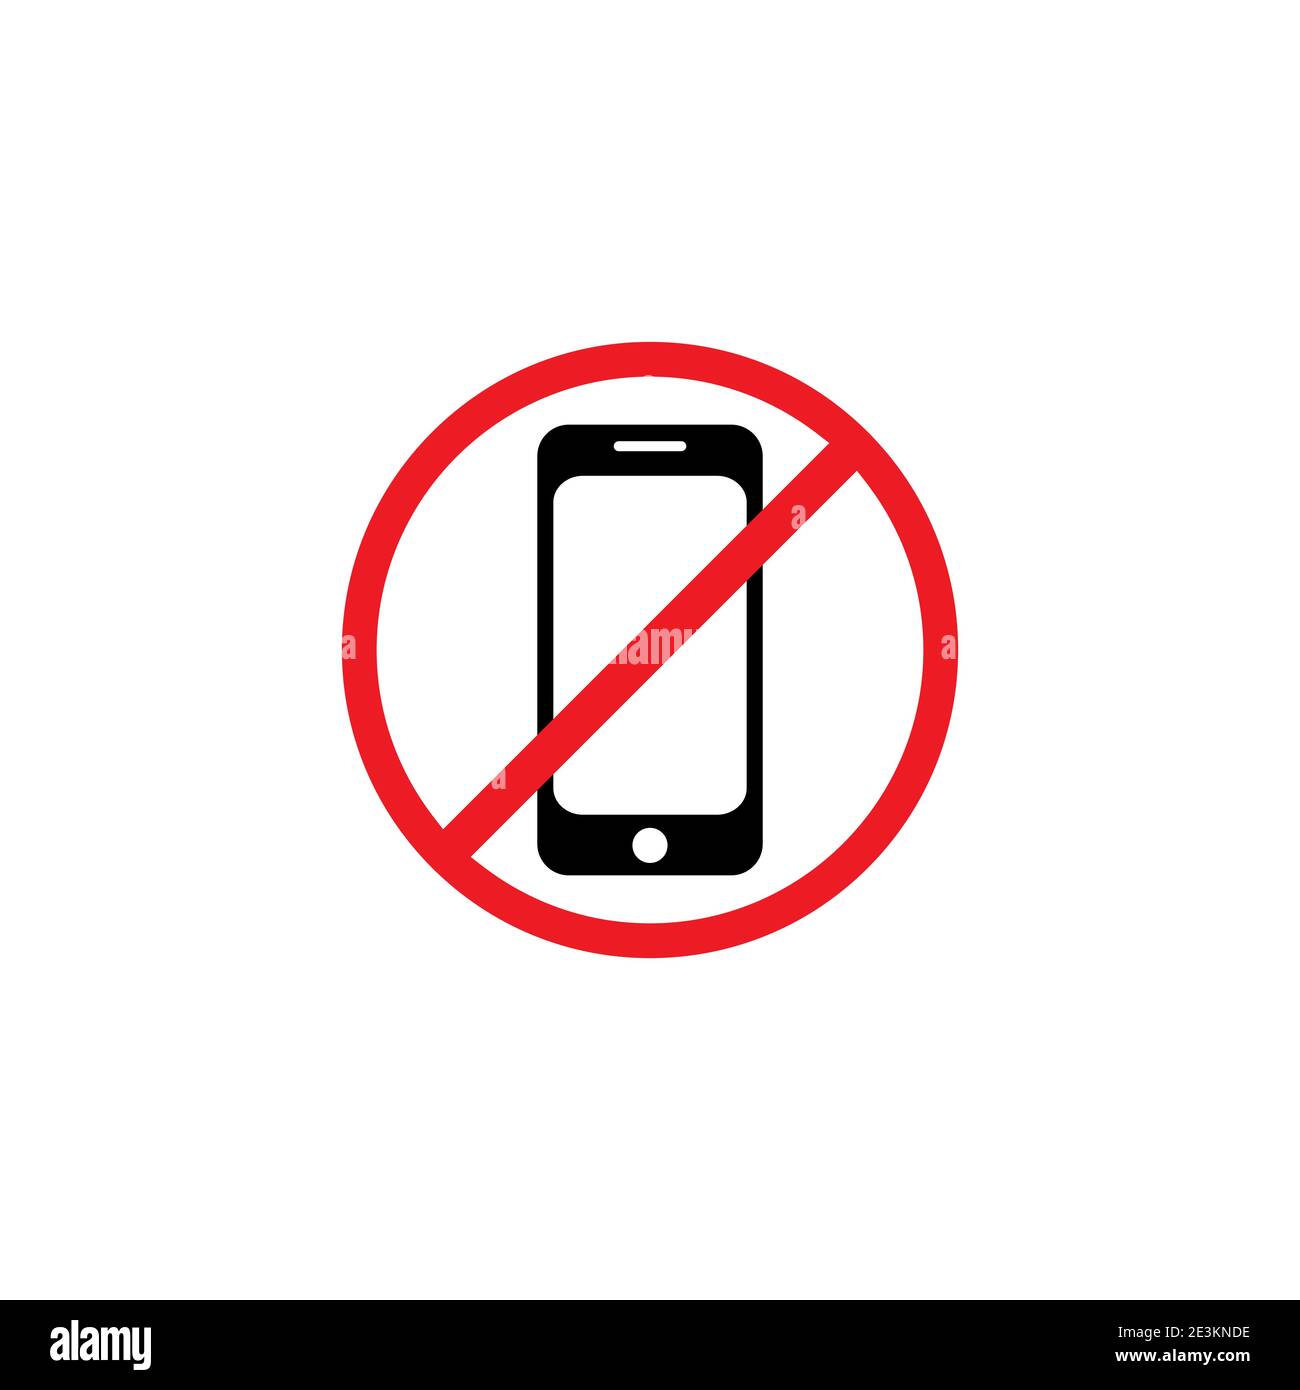 Smartphone silhouette in red crossed circle. simple icon. Forbidden, not allowed mobile. No phones sign. flat vector illustration isolated on white. Stock Vector